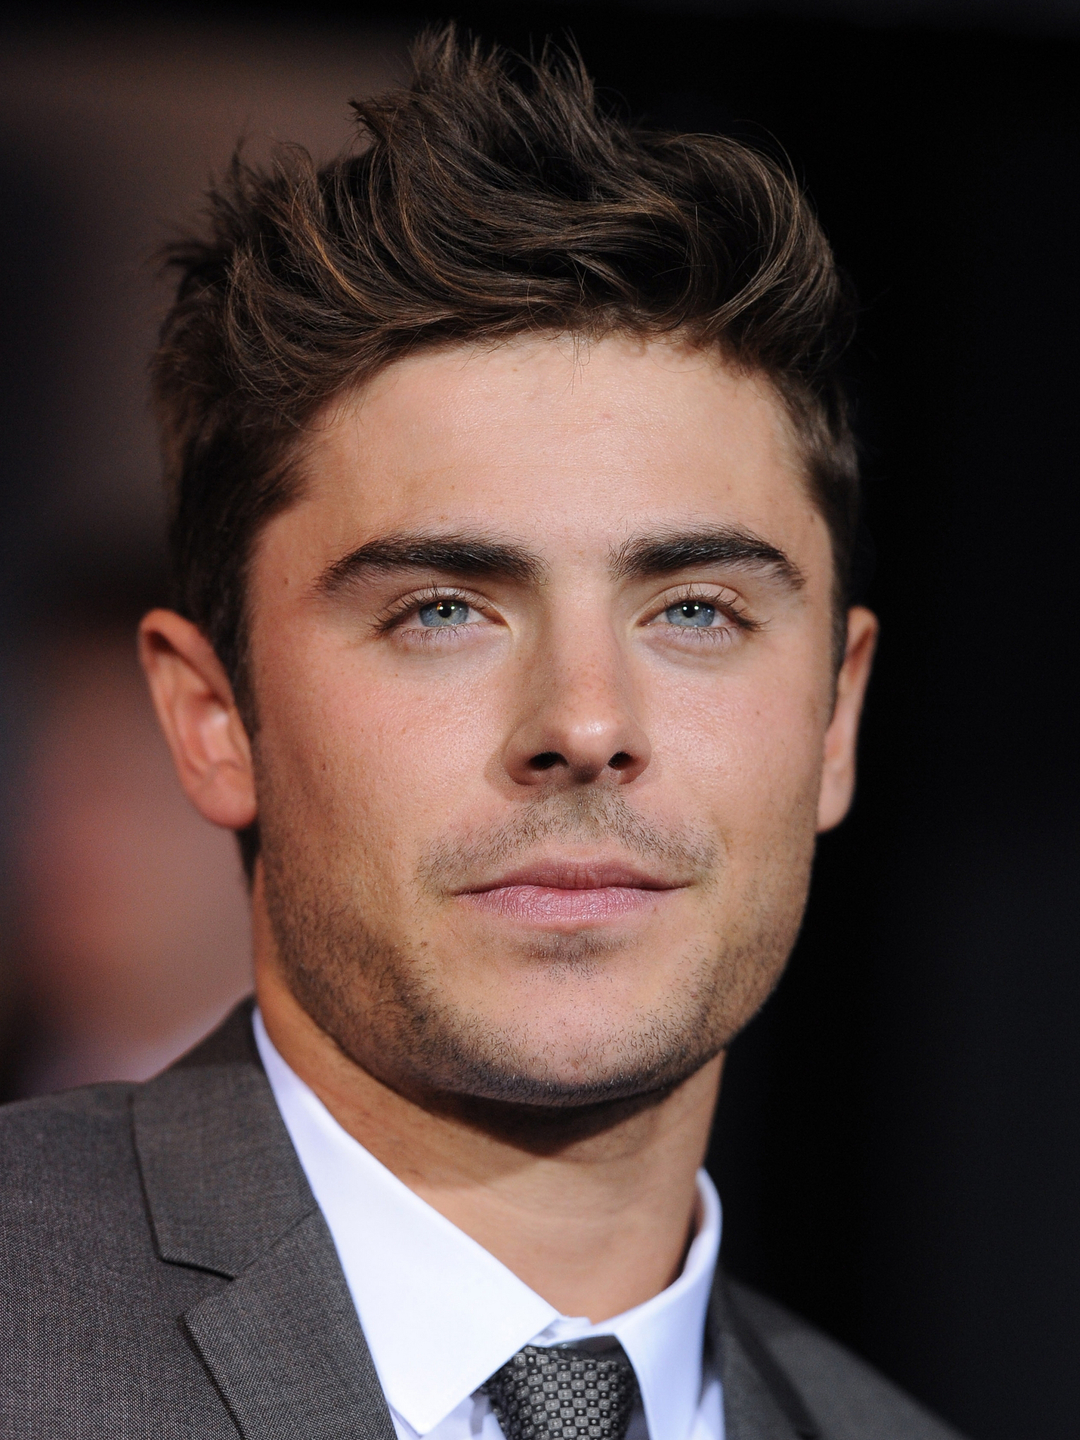 Zac Efron in his youth